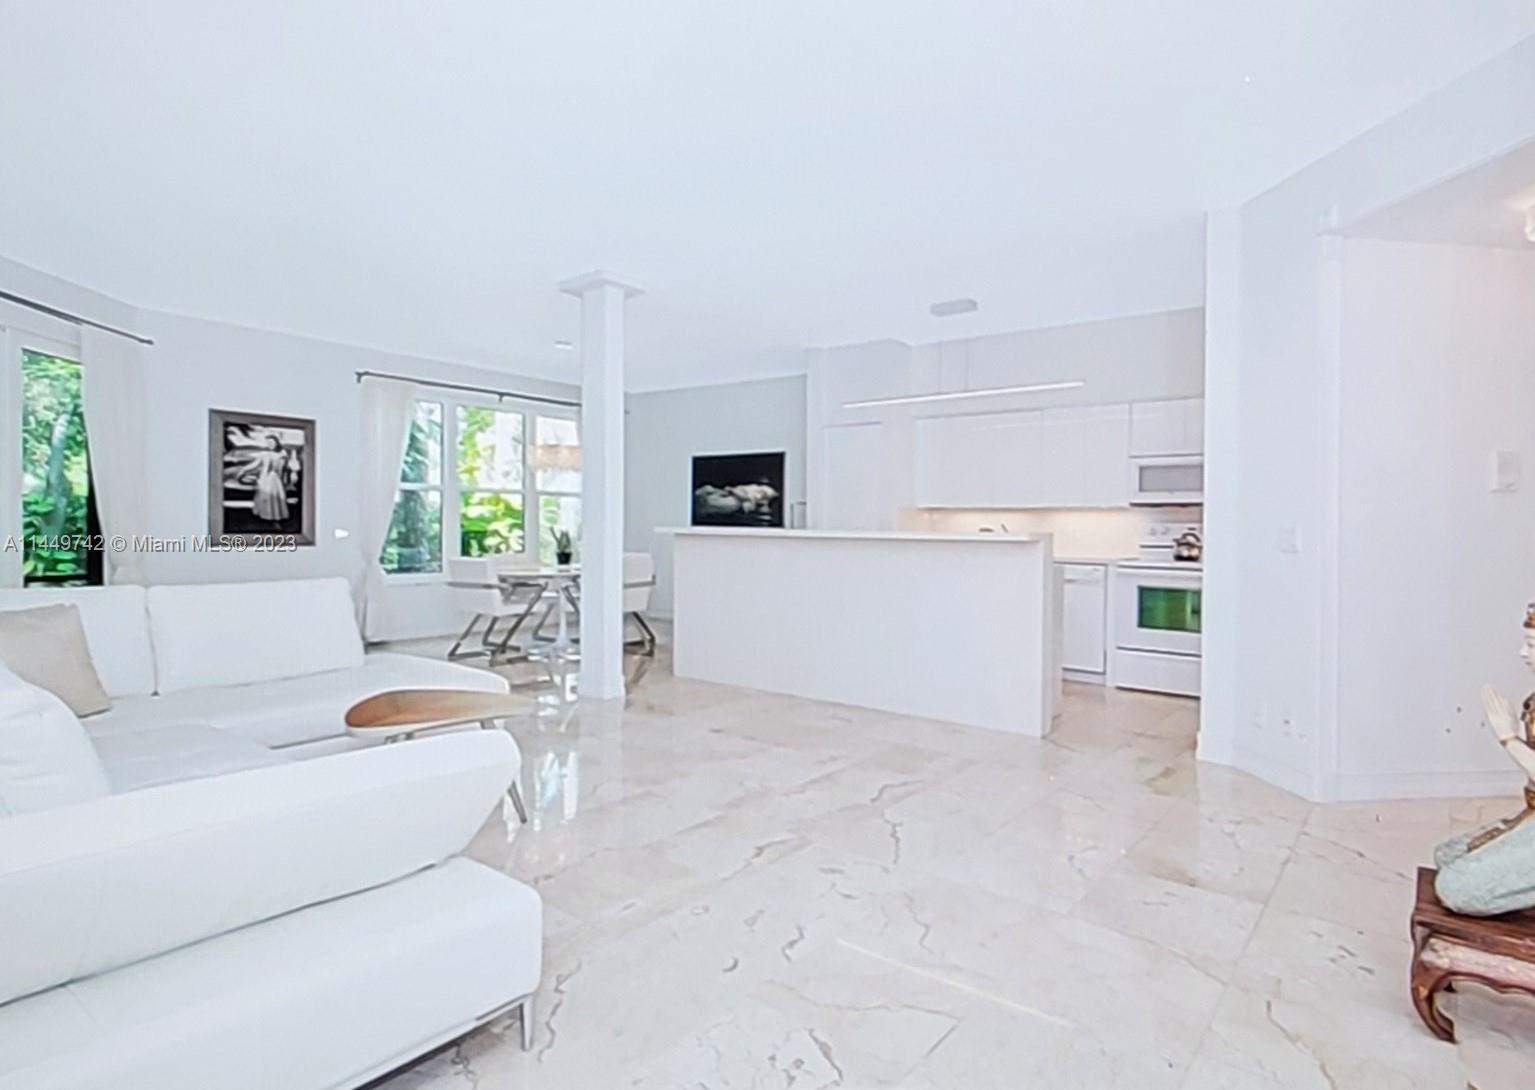 Stunning and Bright 3 bdrm. 2 bath, Contemporary Chic design Coach Home in one of Boca's finest desi